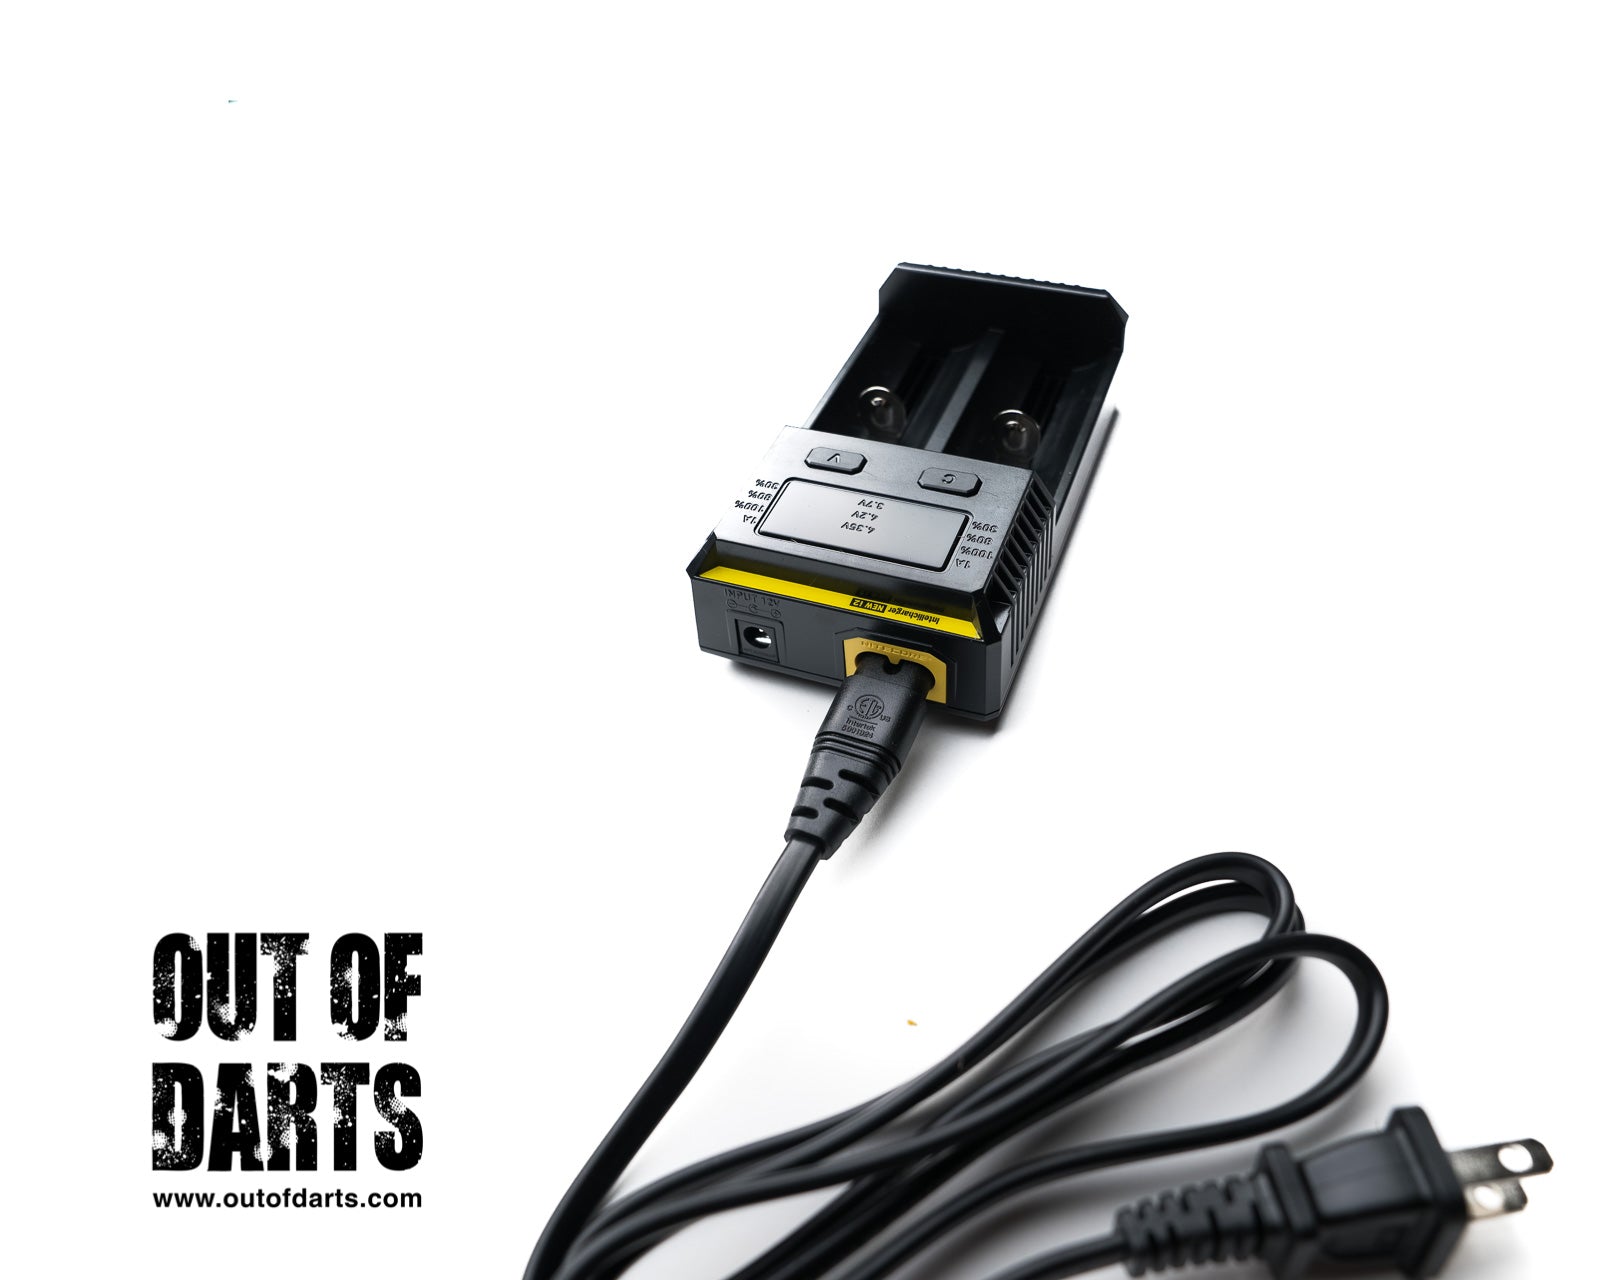 Nerf mod IMR Charger new i2 Nitecore Dual-Bay Charger (High quality IMR charger) - Out of Darts